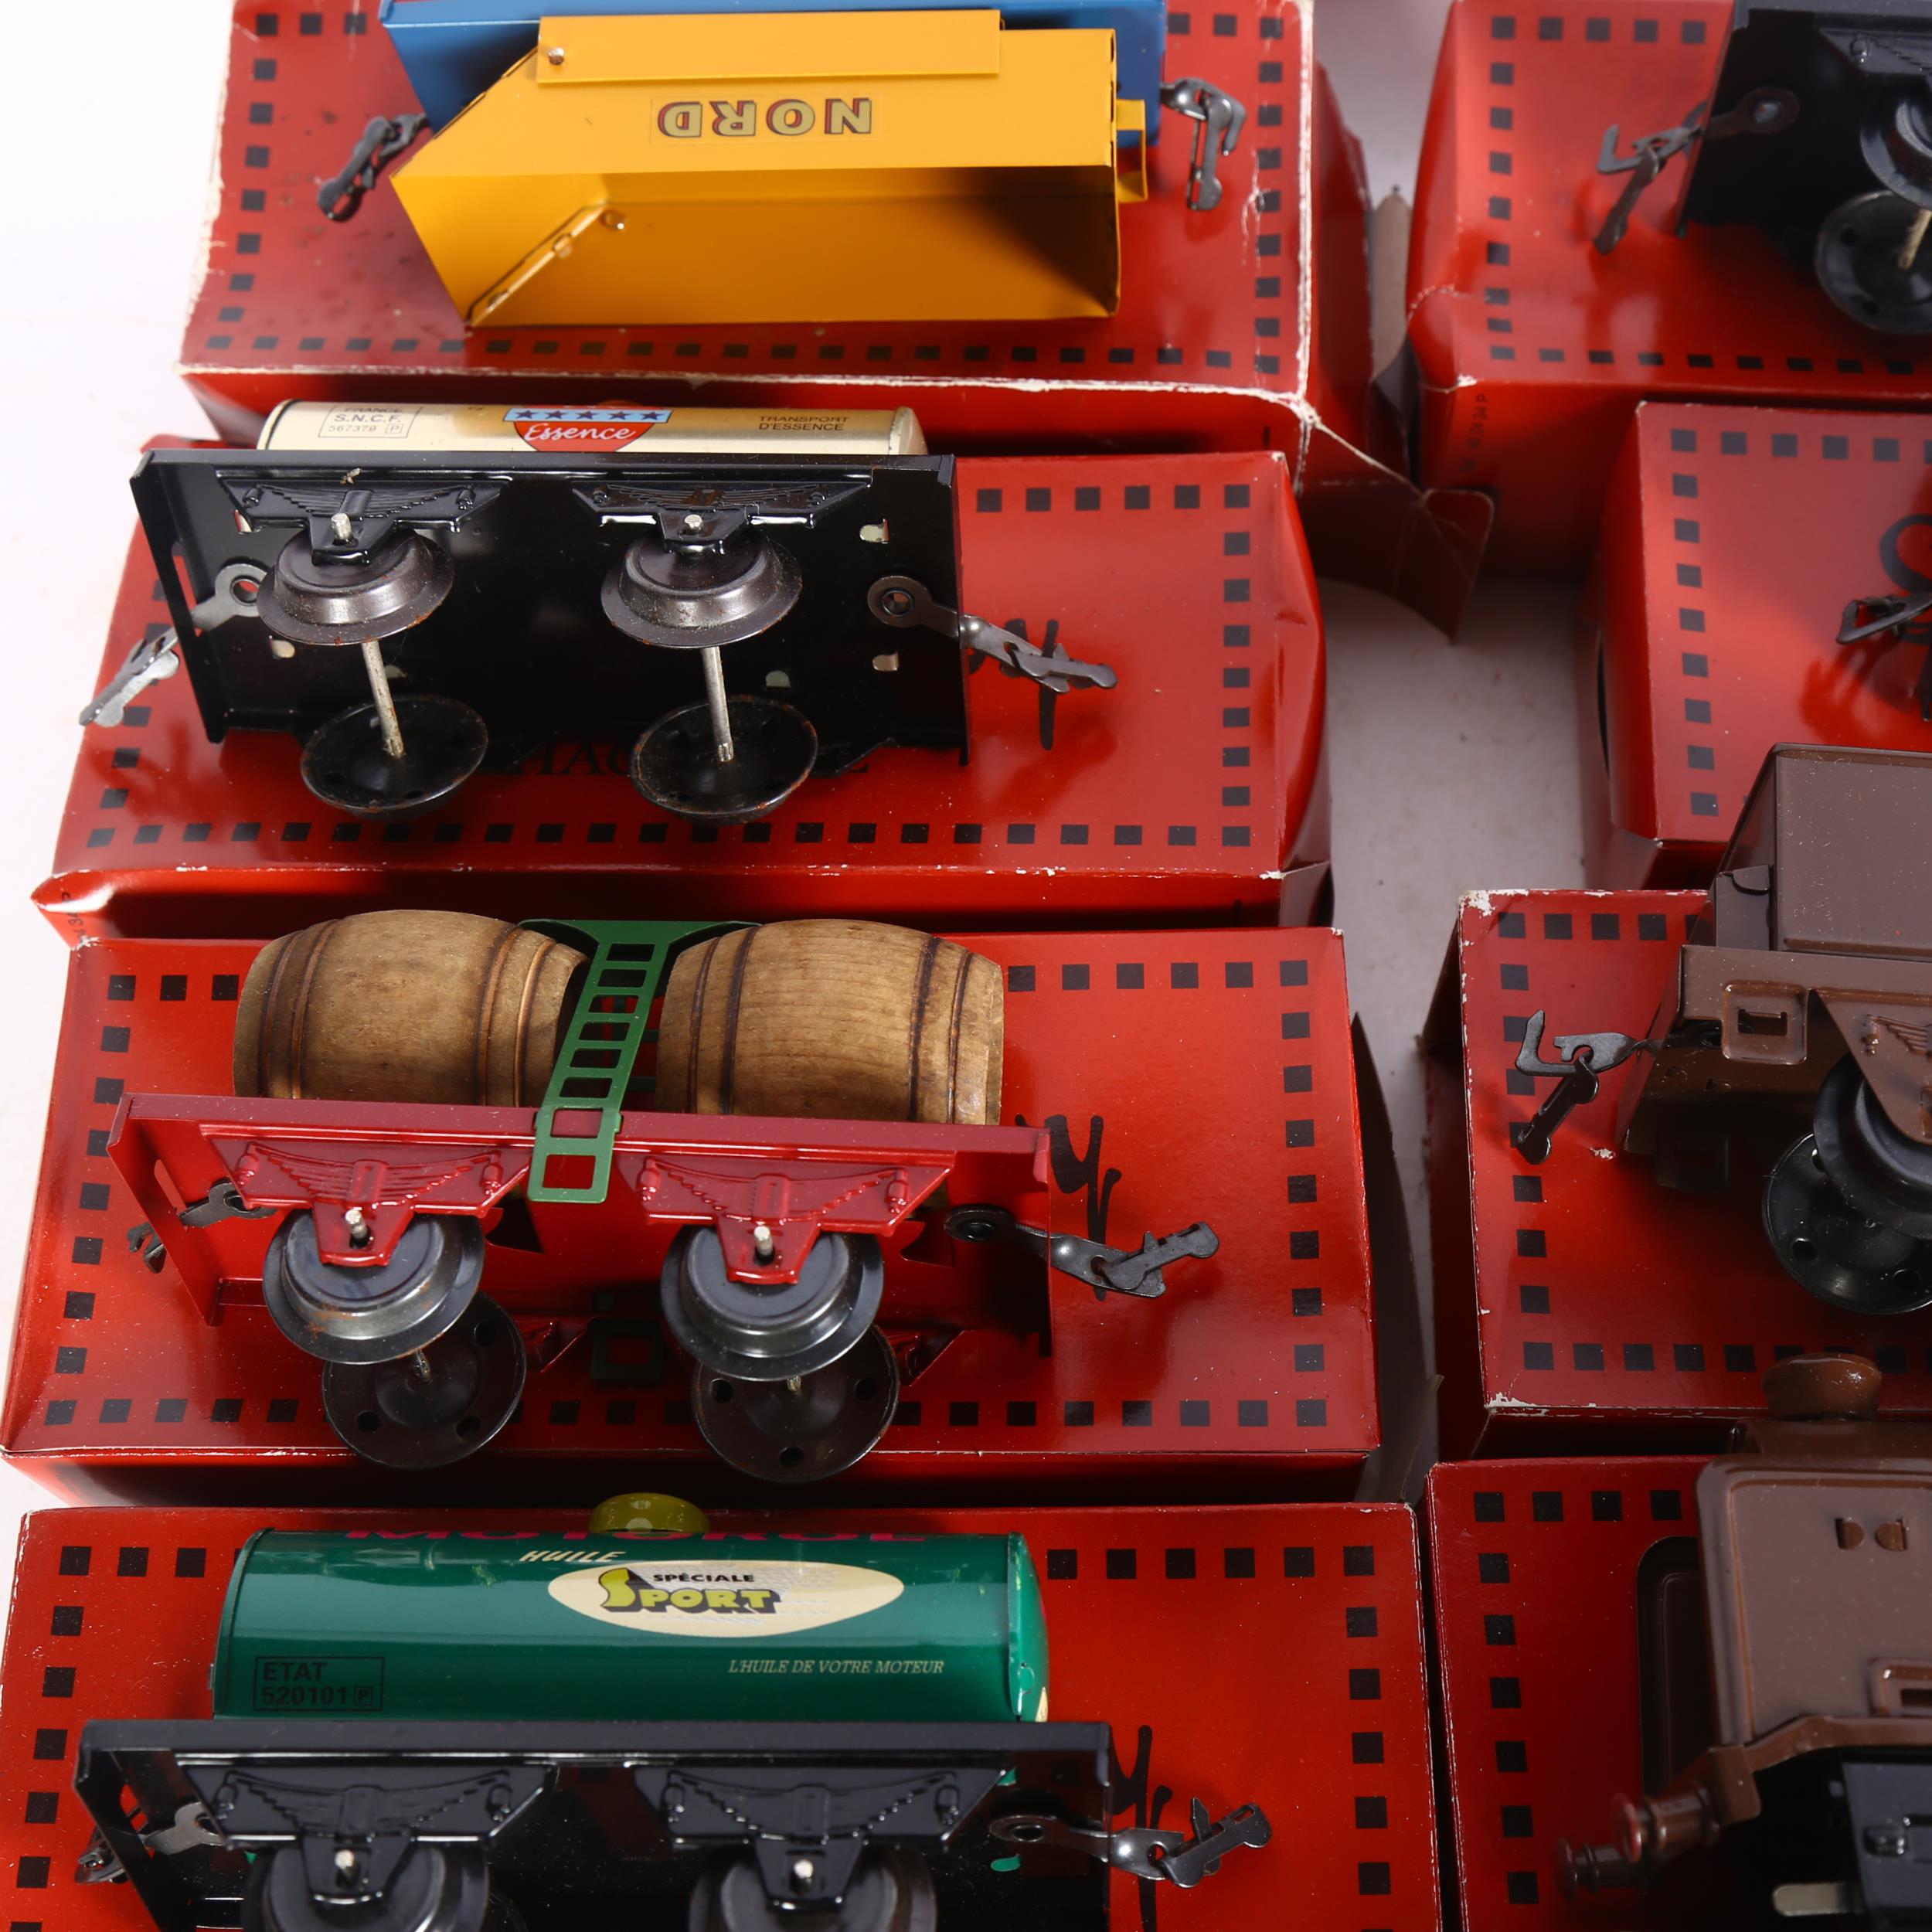 A quantity of French Hornby Series, OO gauge boxed items, including EST020-511 locomotive and - Image 2 of 2